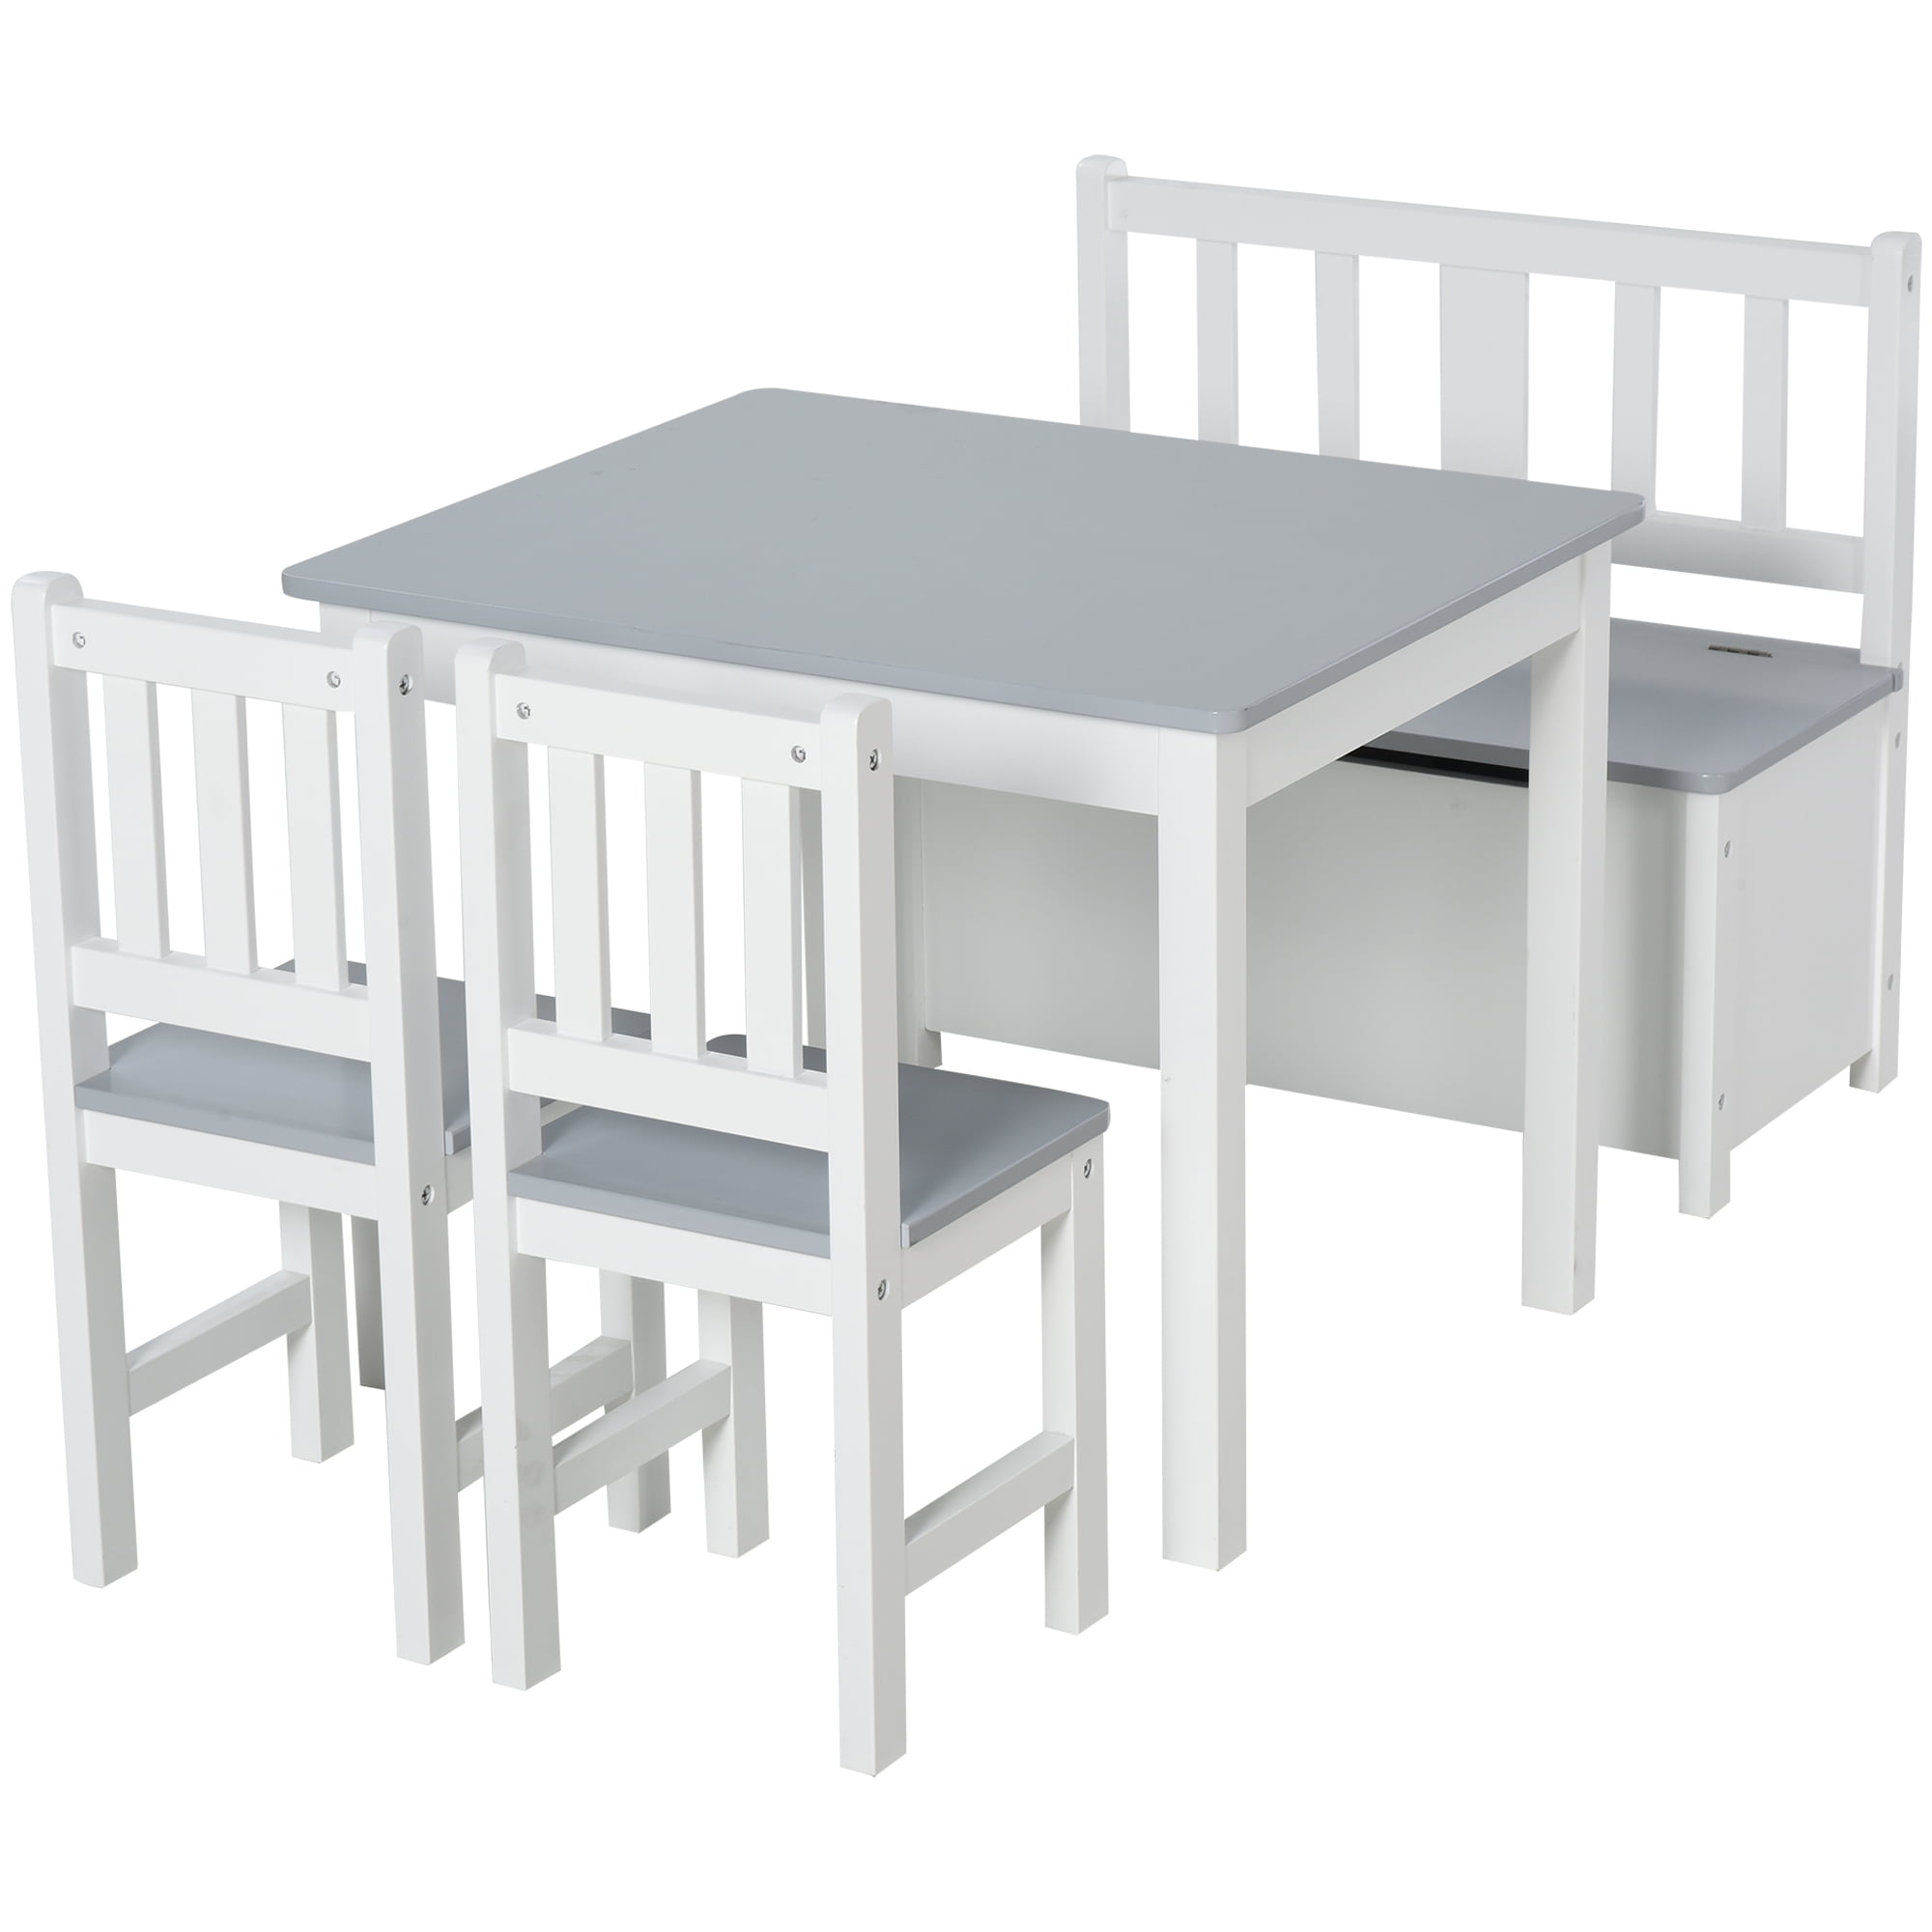 Qaba 4 Piece Kids Table Set With 2, Toddler Wooden Table And Chairs With Storage